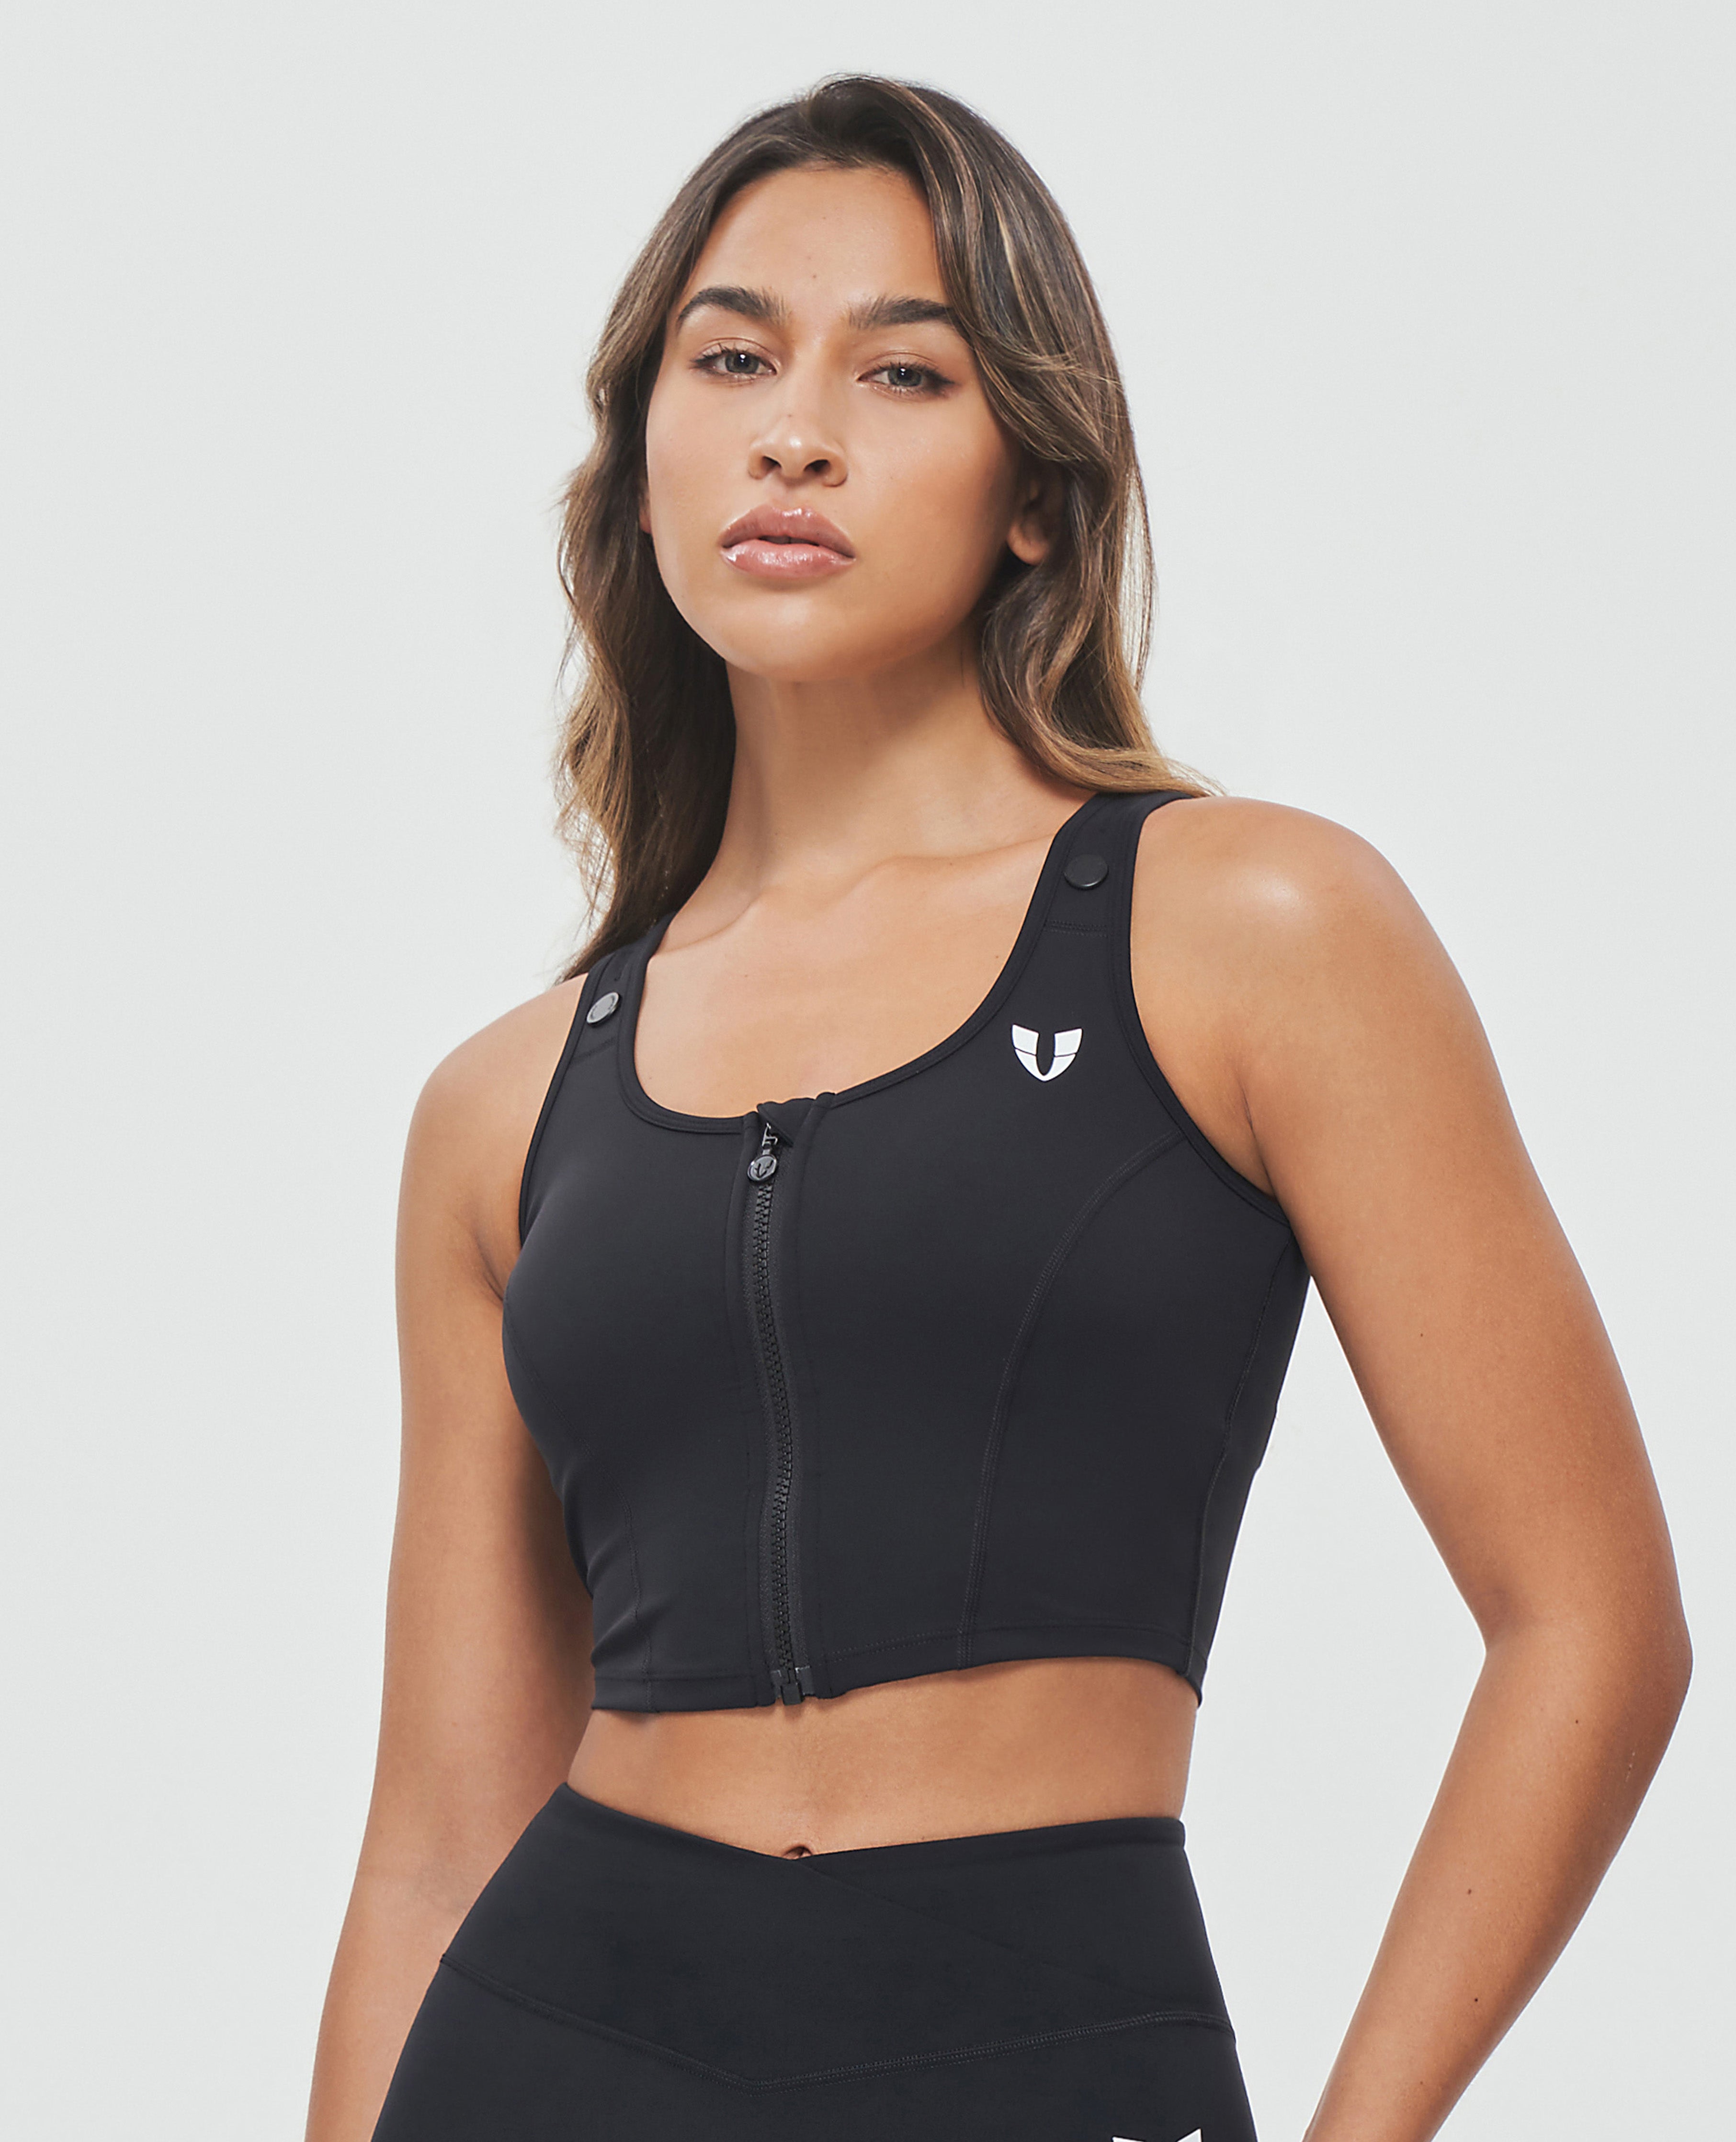 Activewear | Workout Clothes for Women | FIRM ABS